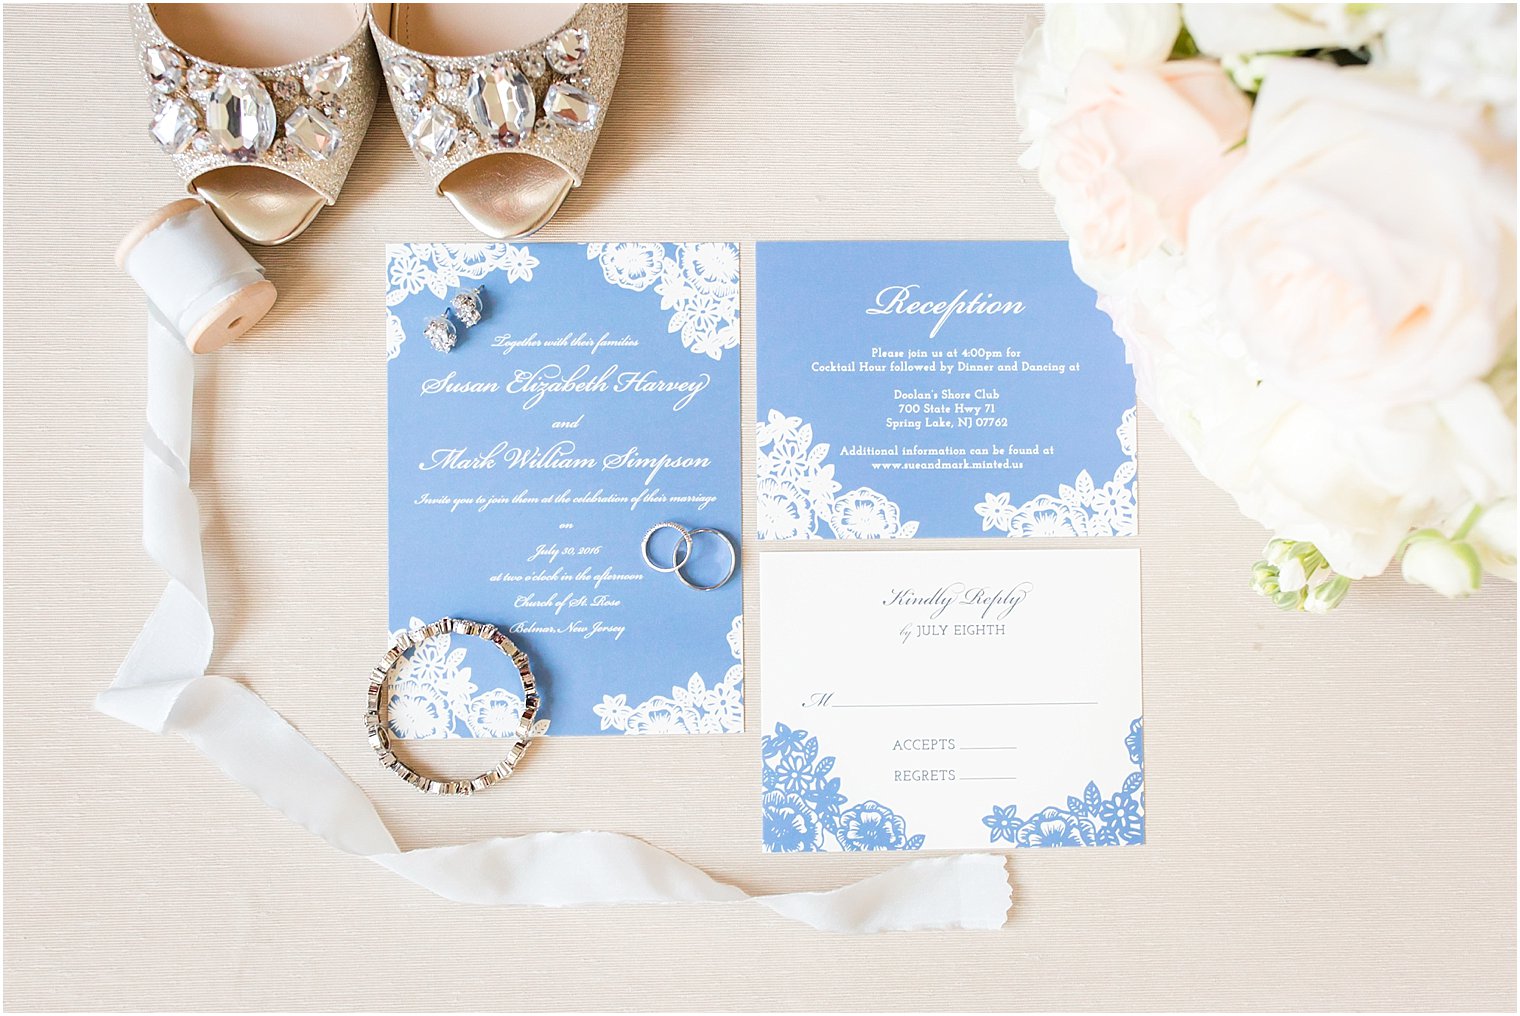 Mueller’s Flower’s and Gifts | Invitation by Minted